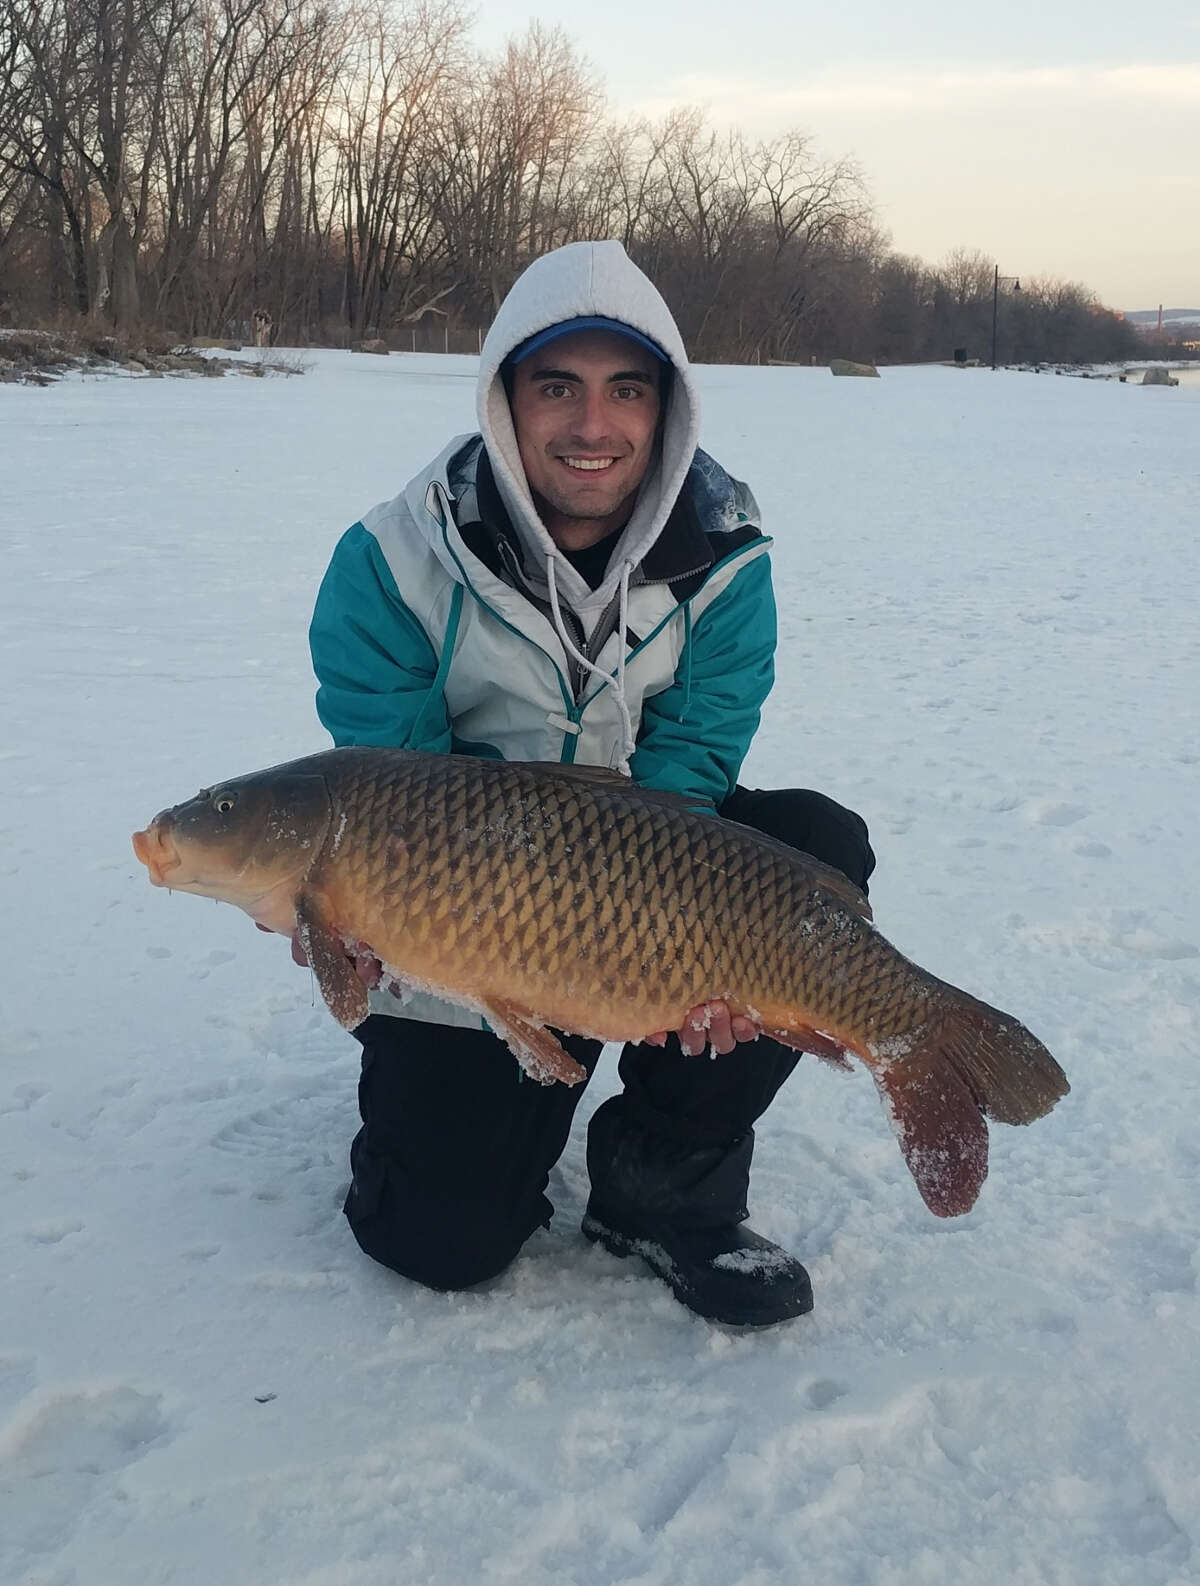 Keep clicking for some big and little fish caught by Times Union readers. Stephen Kline caught this 25-pound carp on a frigid February day in 2019 near Amsterdam, at one of the only sections of the Mohawk River that wasn't iced over.